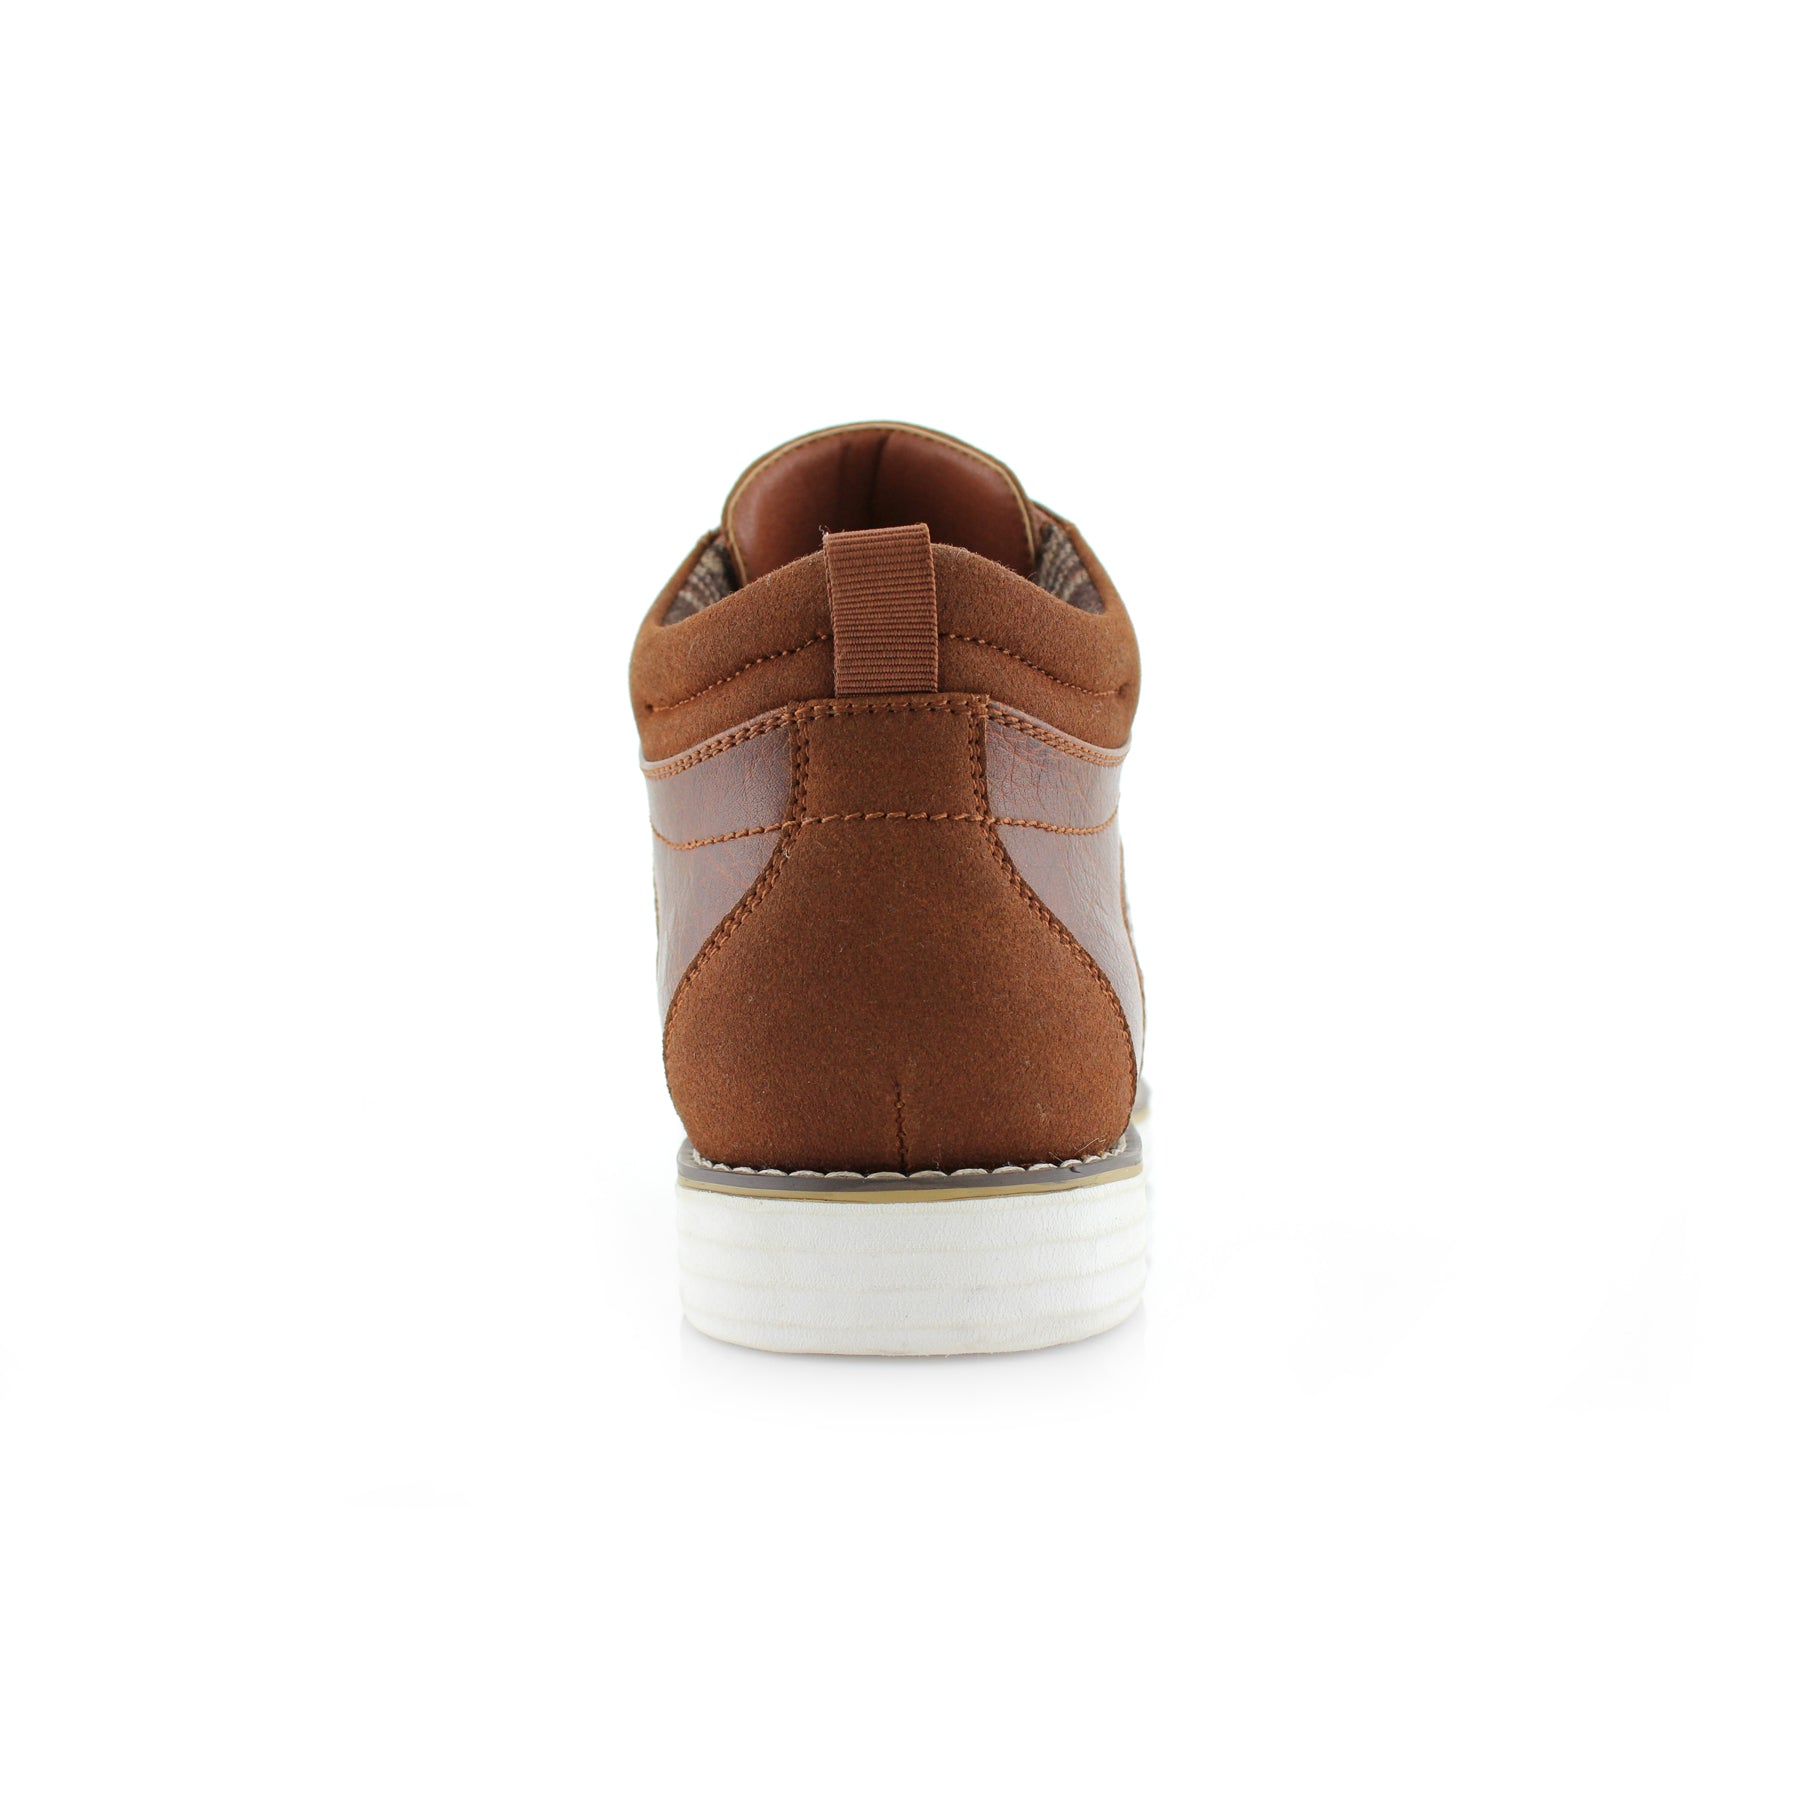 Duo-Textured Perforated Sneakers | Sanders by Polar Fox | Conal Footwear | Back Angle View